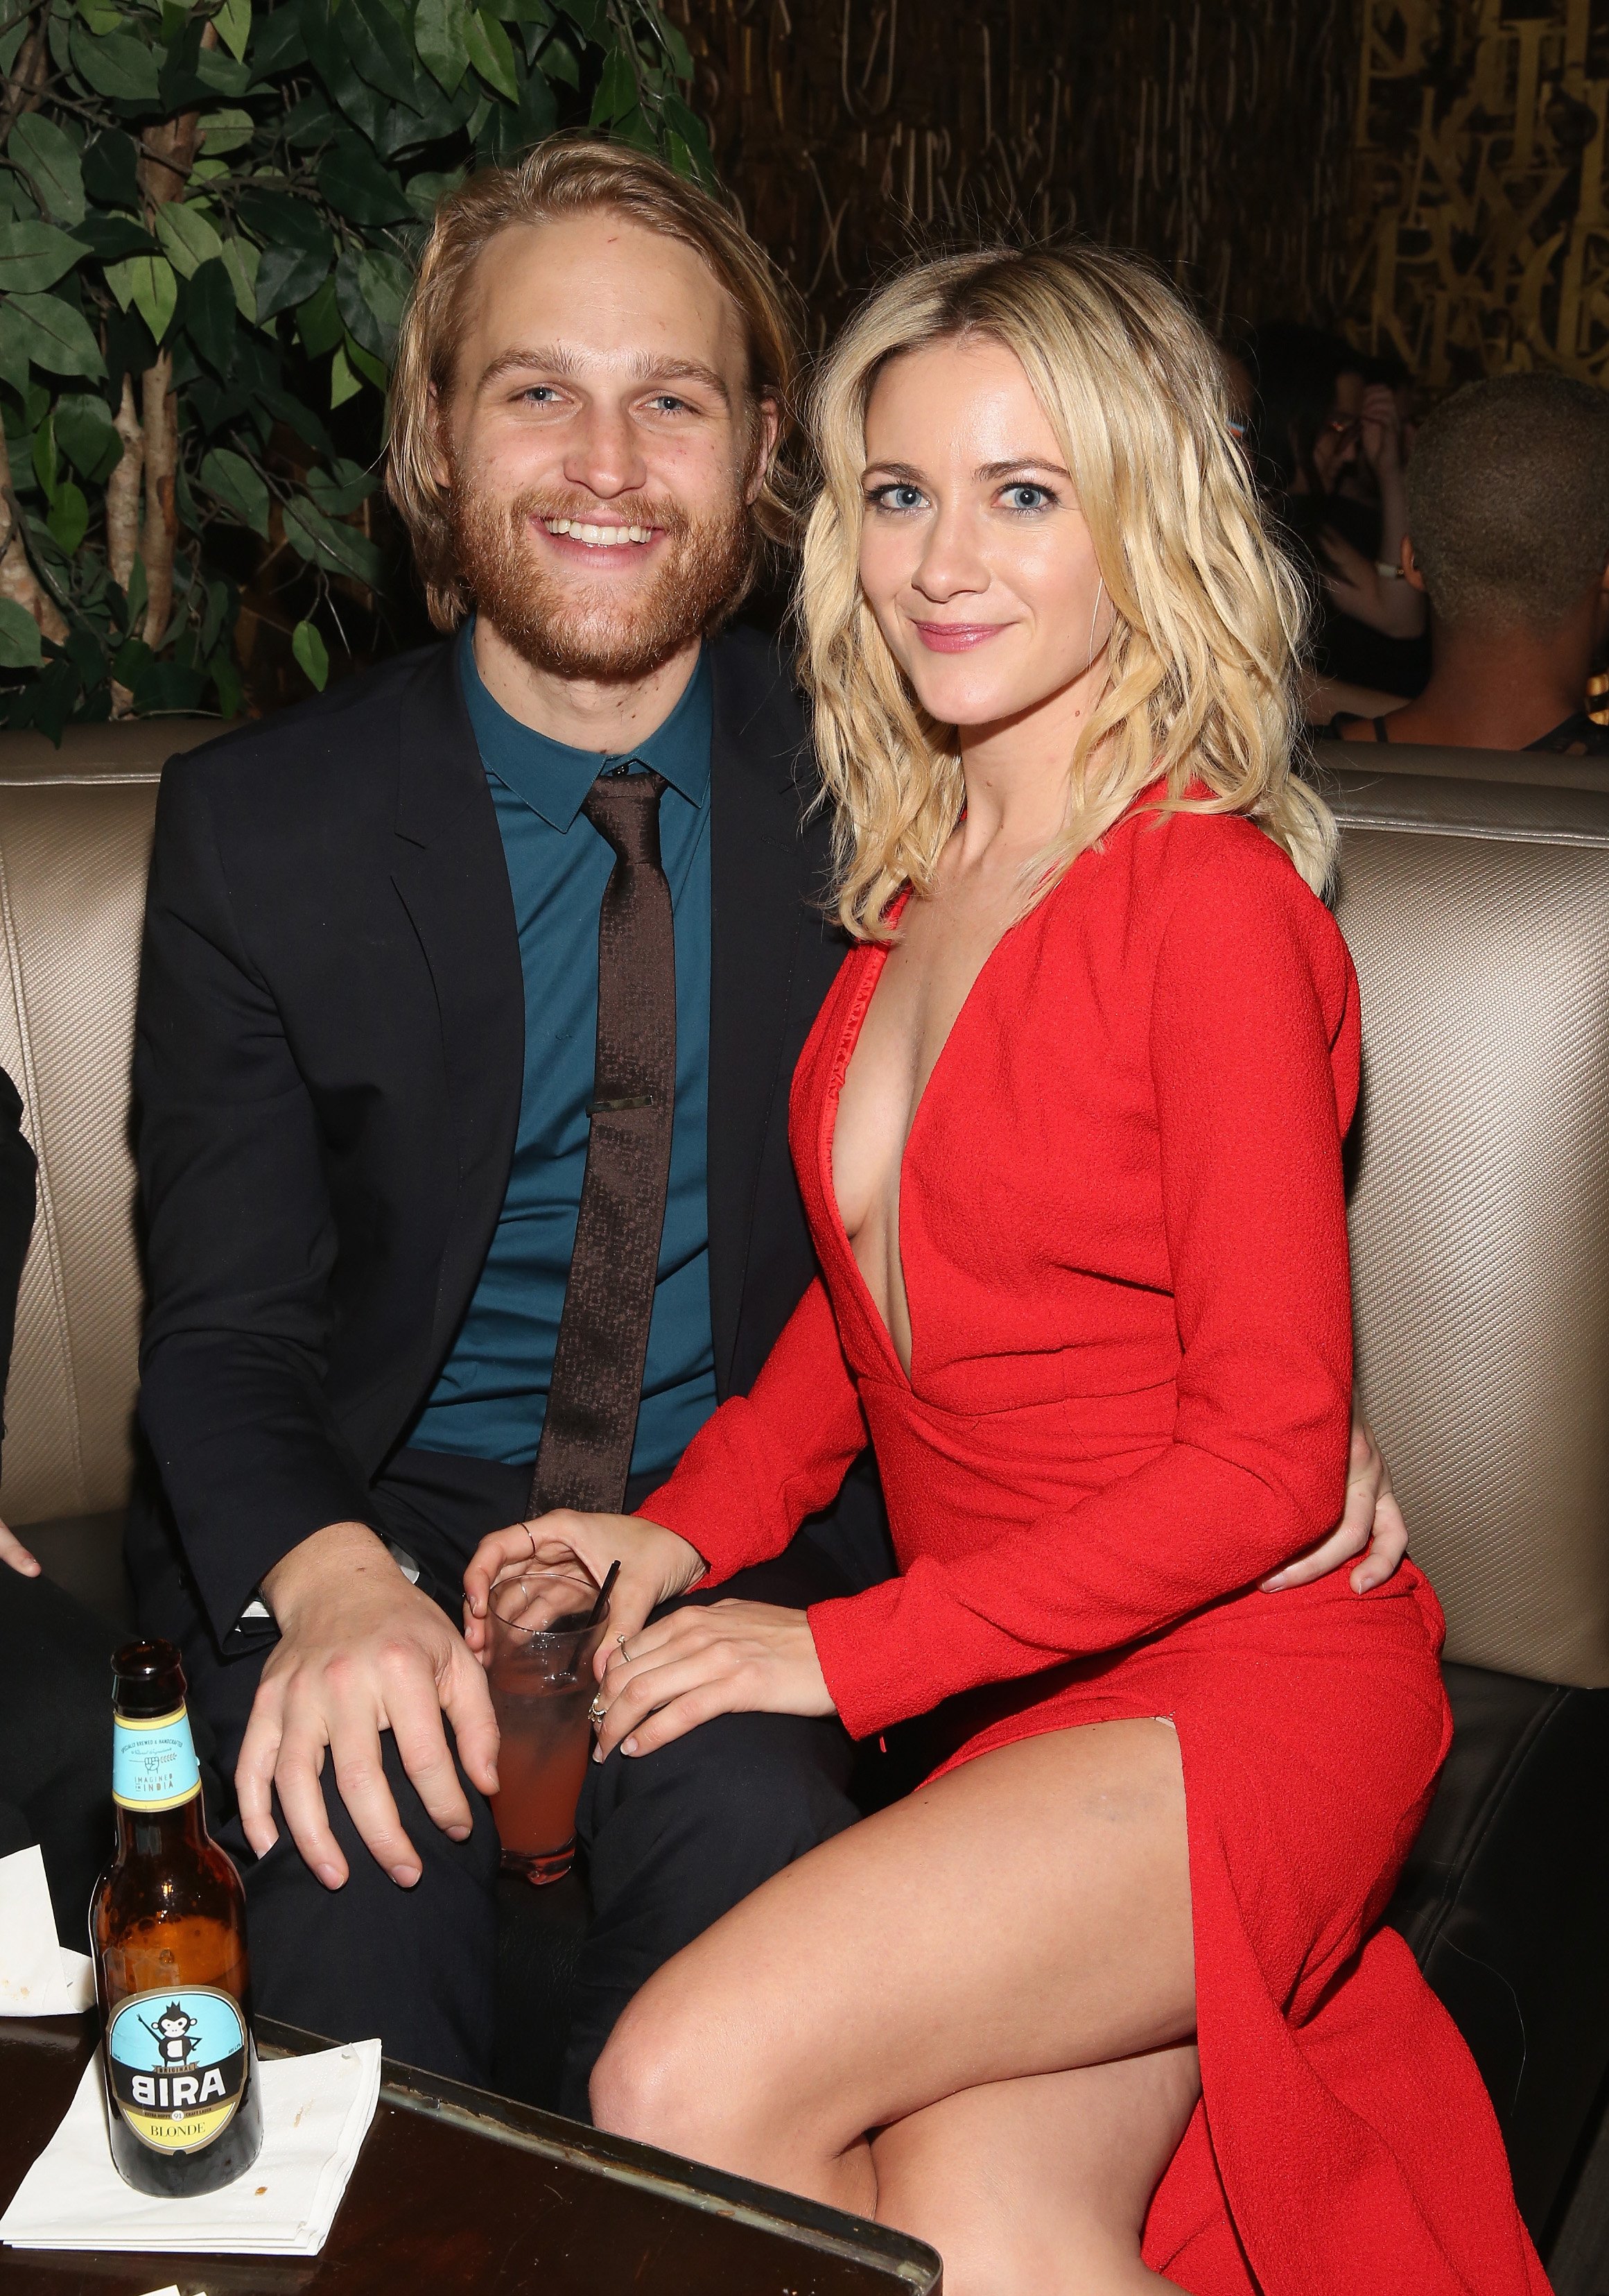 Wyatt Russell and Meredith Hagner attend 2016 Tribeca Film Festival After Party at 1OAK on April 16, 2016 | Photo: Getty Images